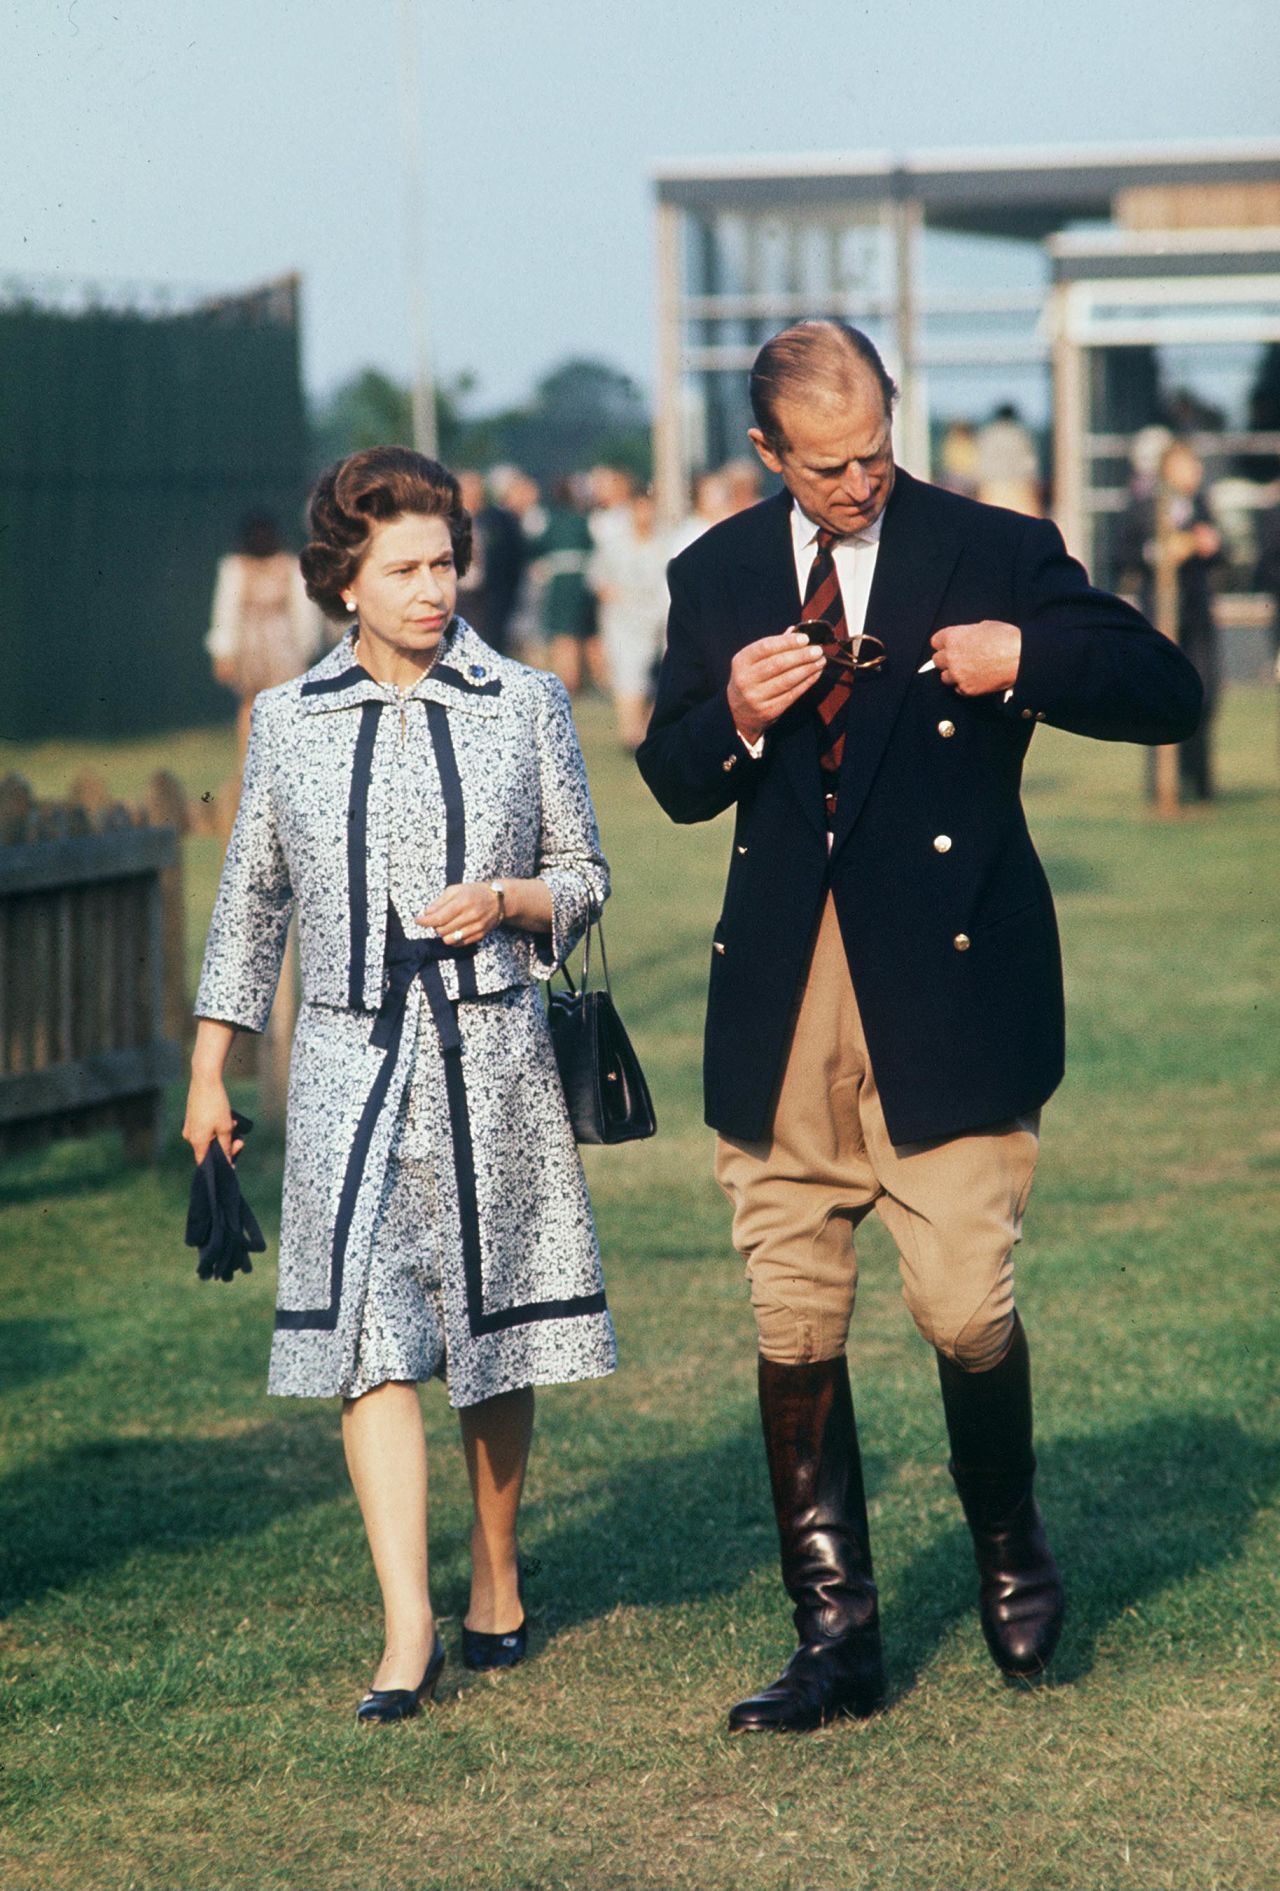 Her Royal Majesty the Queen and Prince Philip at Guards Polo Club in Windsor.